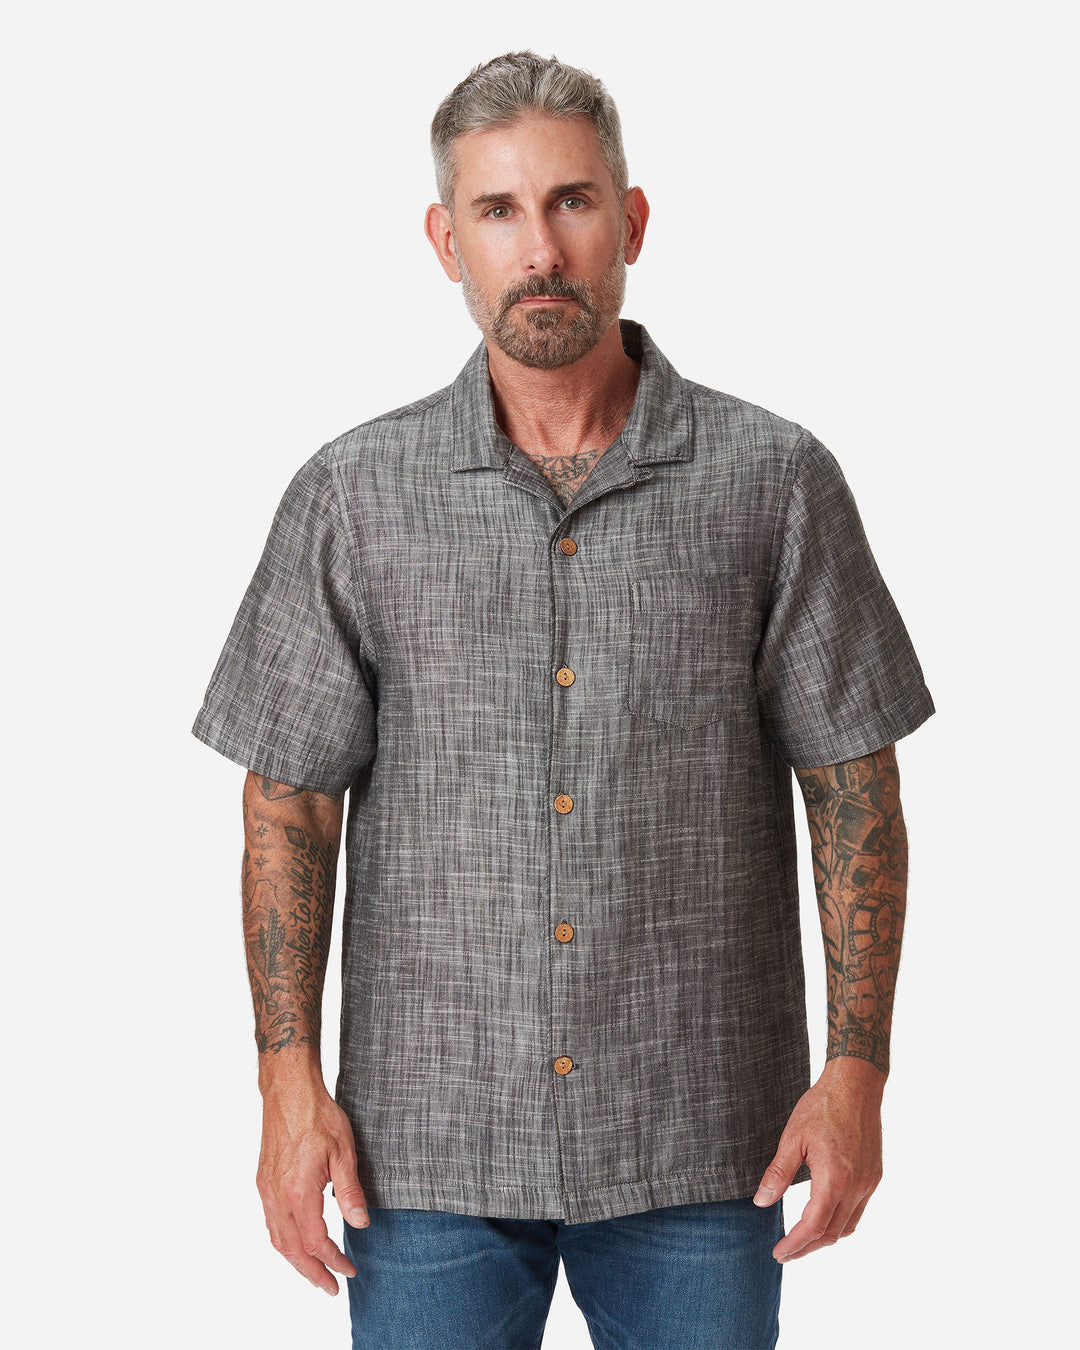 Model with directly frontward posture Ace Rivington "Black" Double gauze soft-textured cotton fabric camp collar shirt with coconut buttons and left-breast pocket and a pair of Ace Rivington dark vintage blue denim jeans